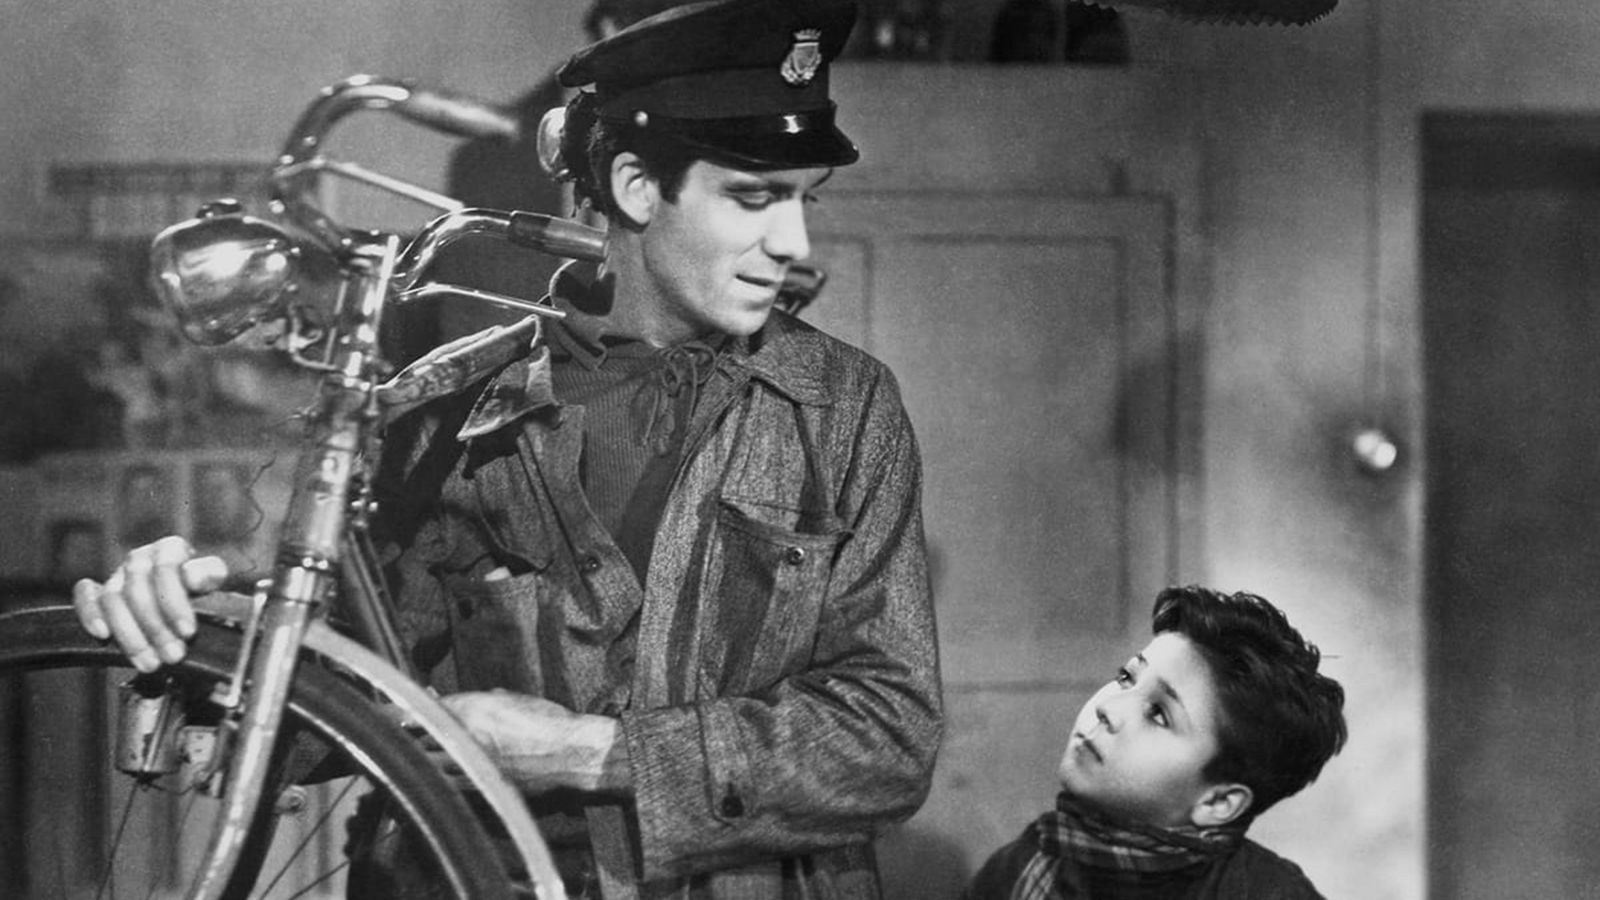 Bicycle Thieves The Criterion Collection